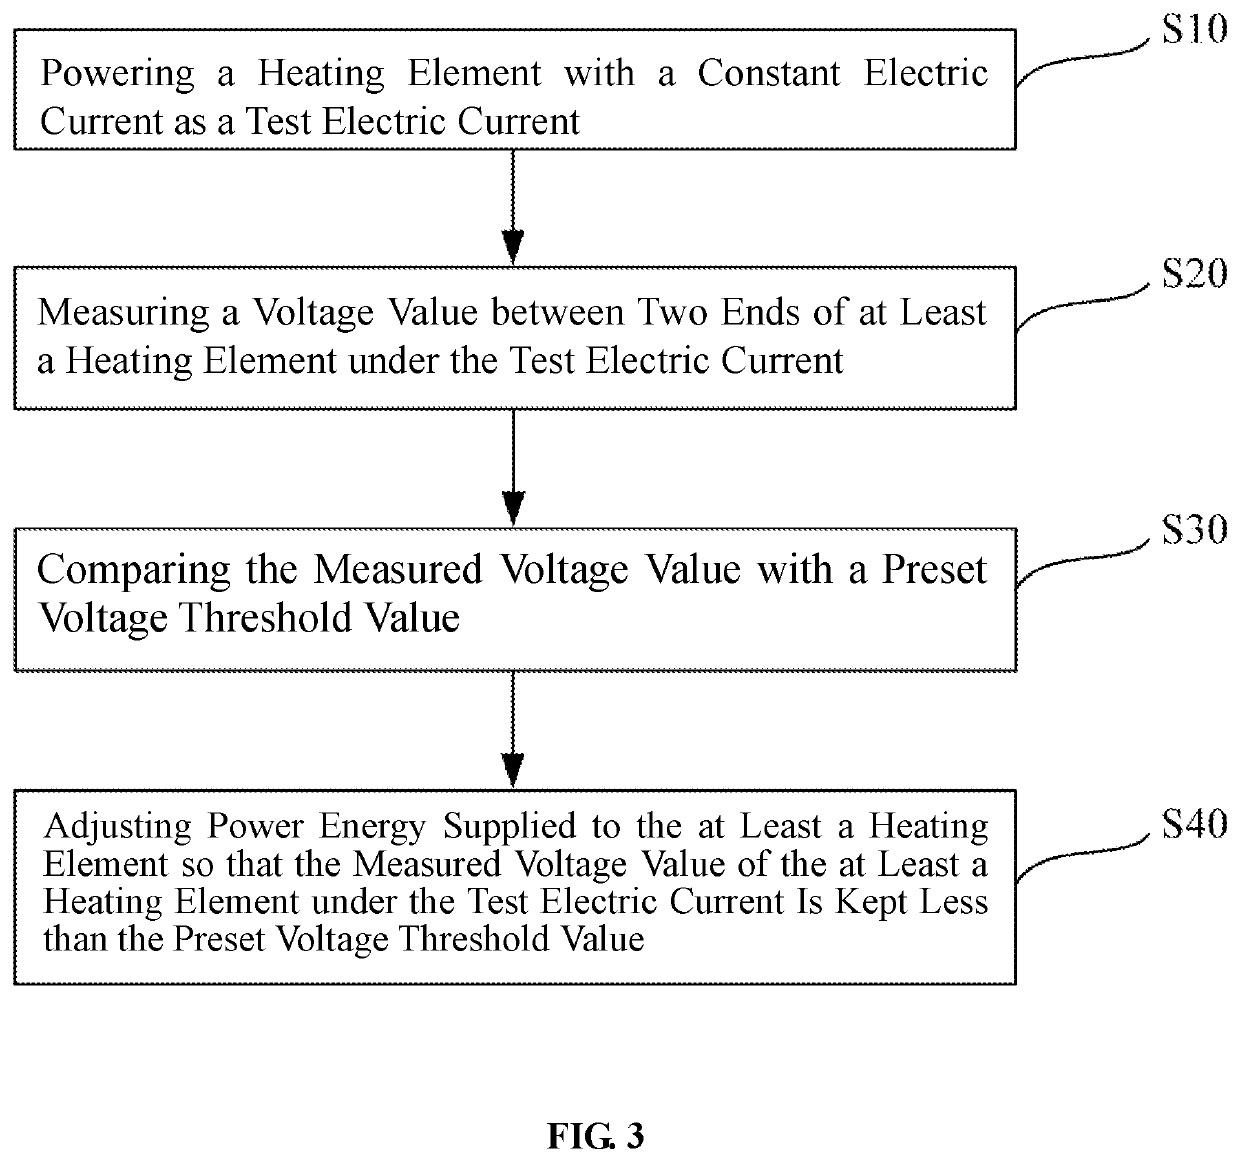 Electric heating smoking system and release control method for volatile compound